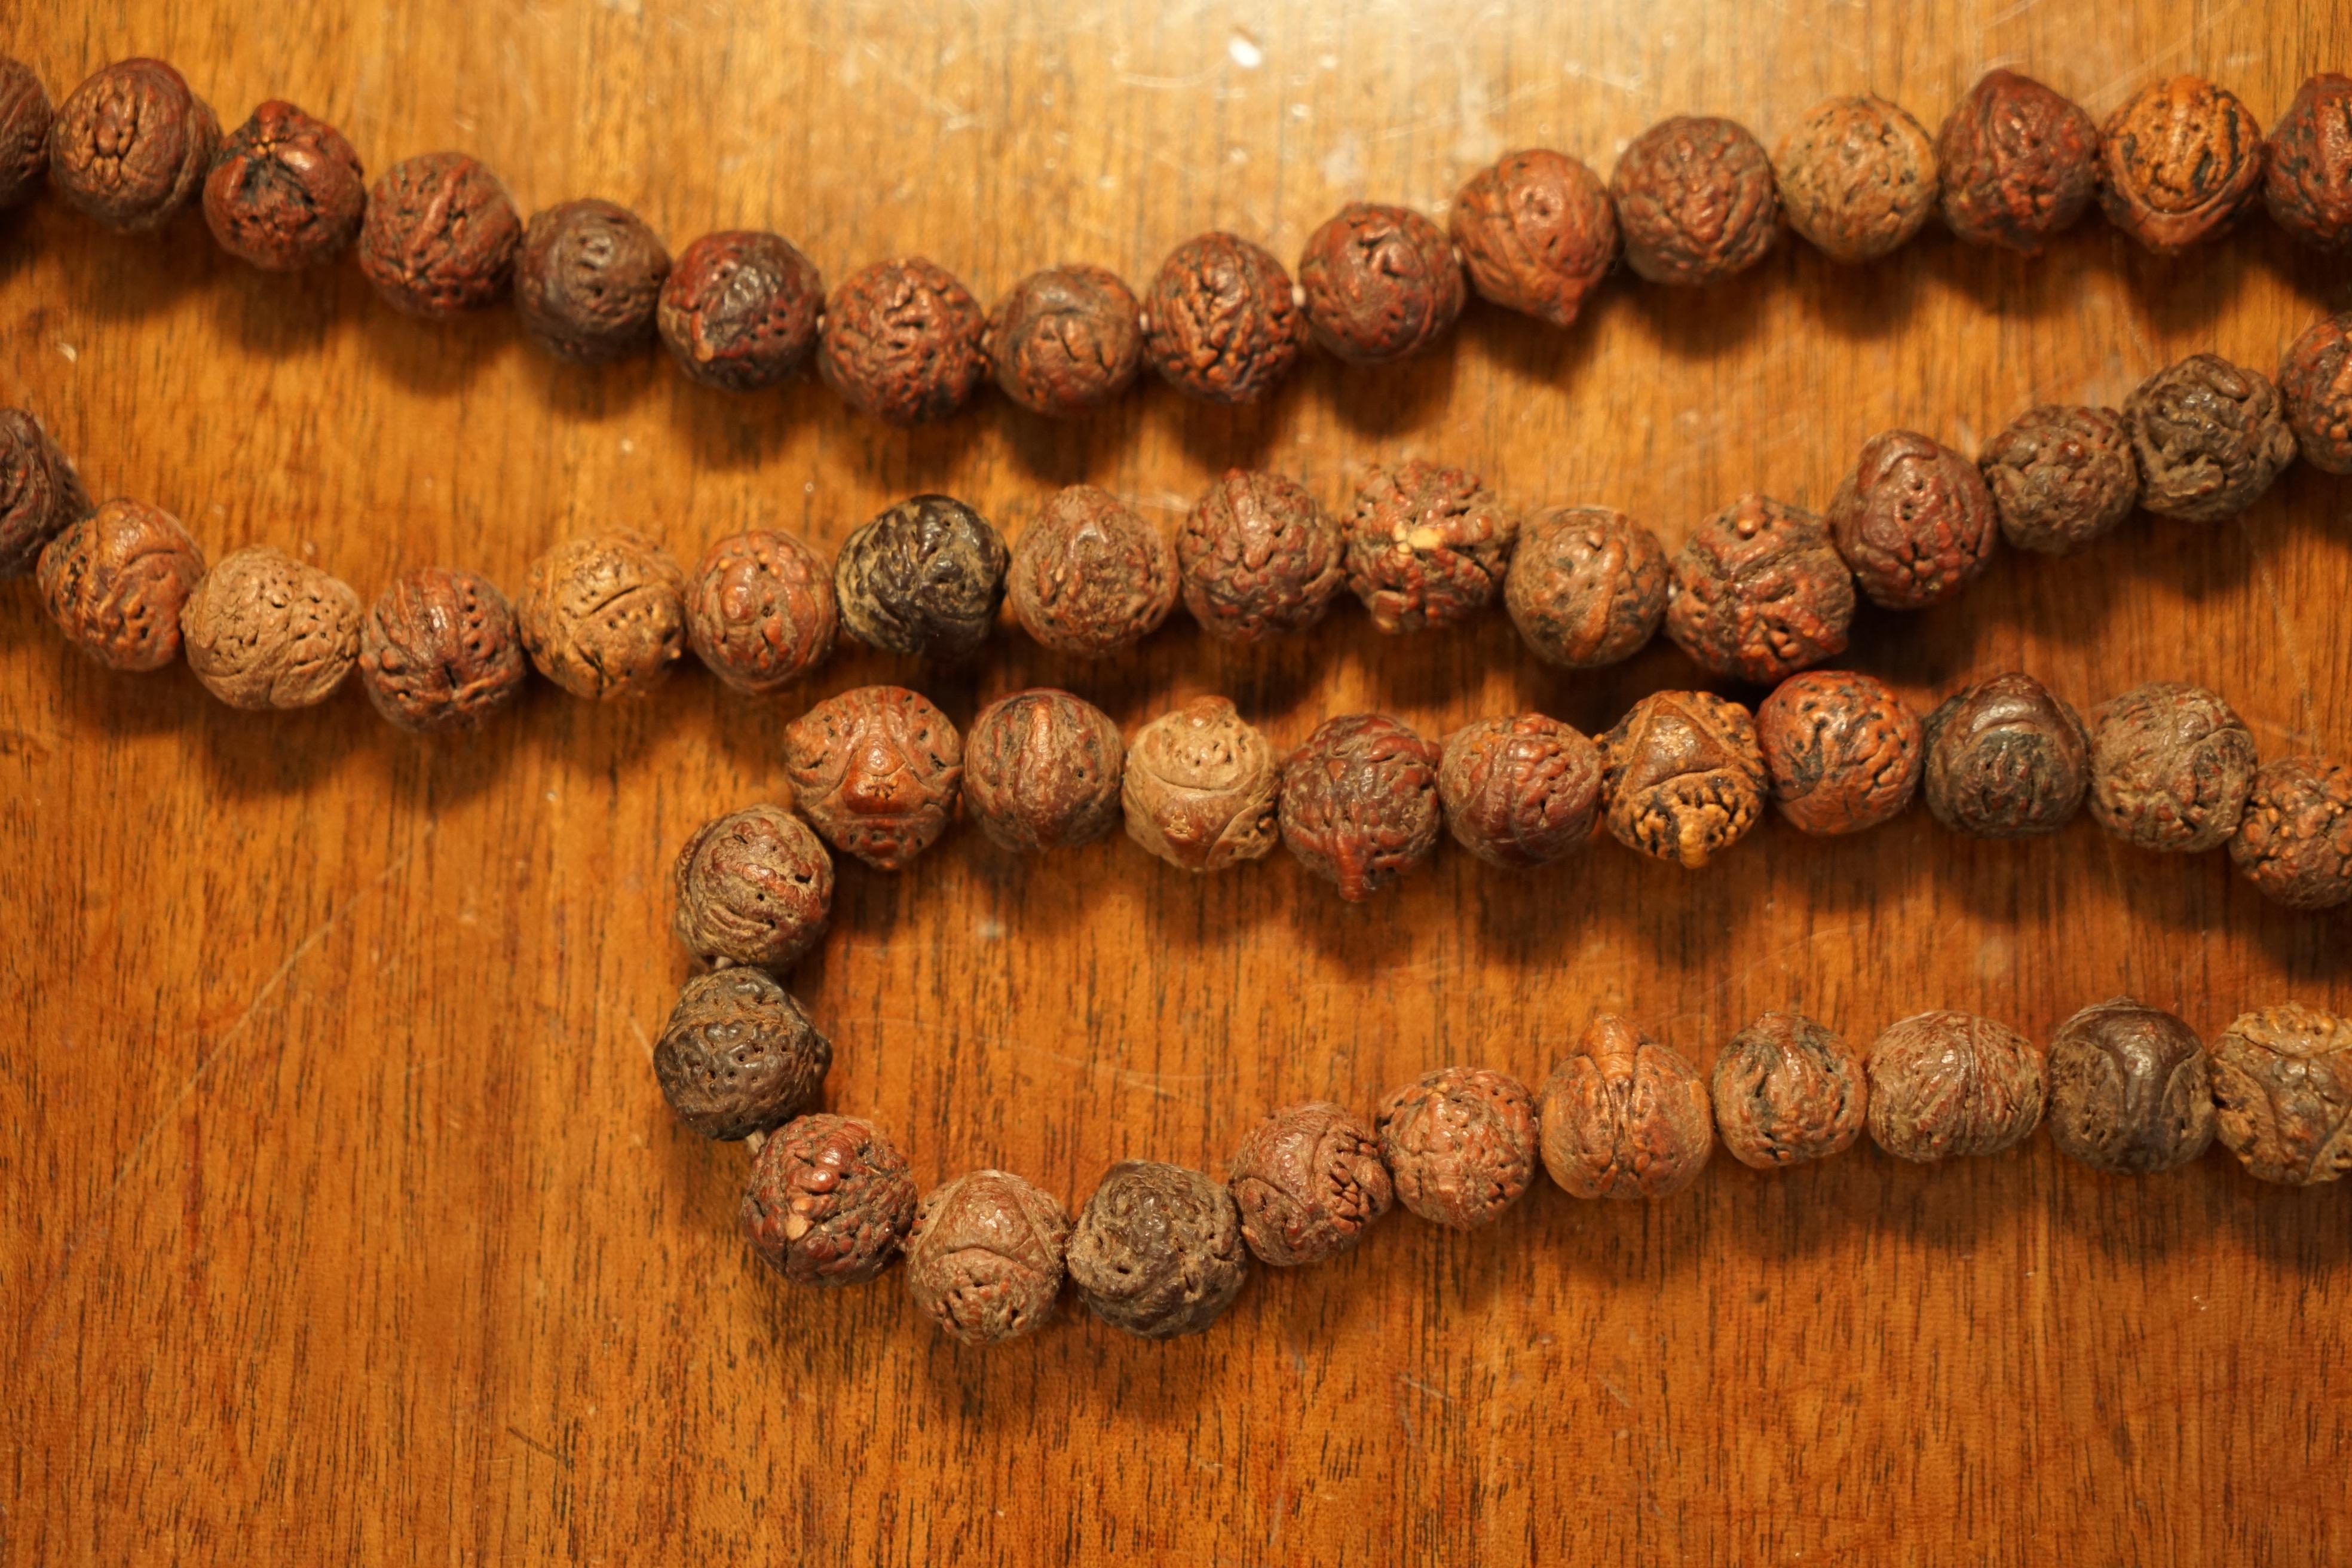 Artisan Very Long Antique Tibetan Buddist Carved Mala Beads Necklace Must See Pictures For Sale